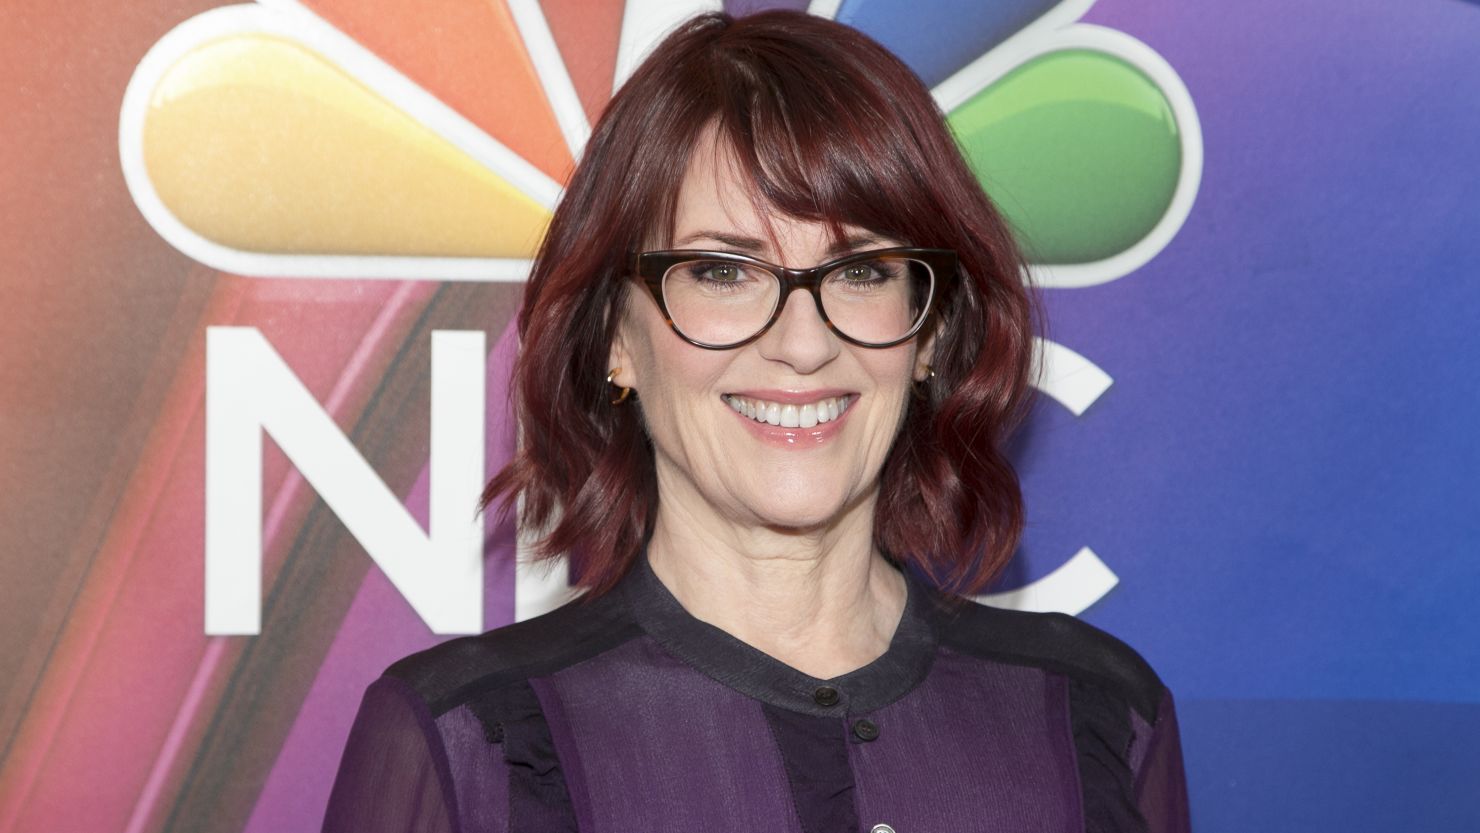 Megan Mullally arrives for the 2016 Winter TCA Tour - NBCUniversal Press Tour at Langham Hotel on January 13, 2016 in Pasadena, Californi  (Photo by Gabriel Olsen/FilmMagic)